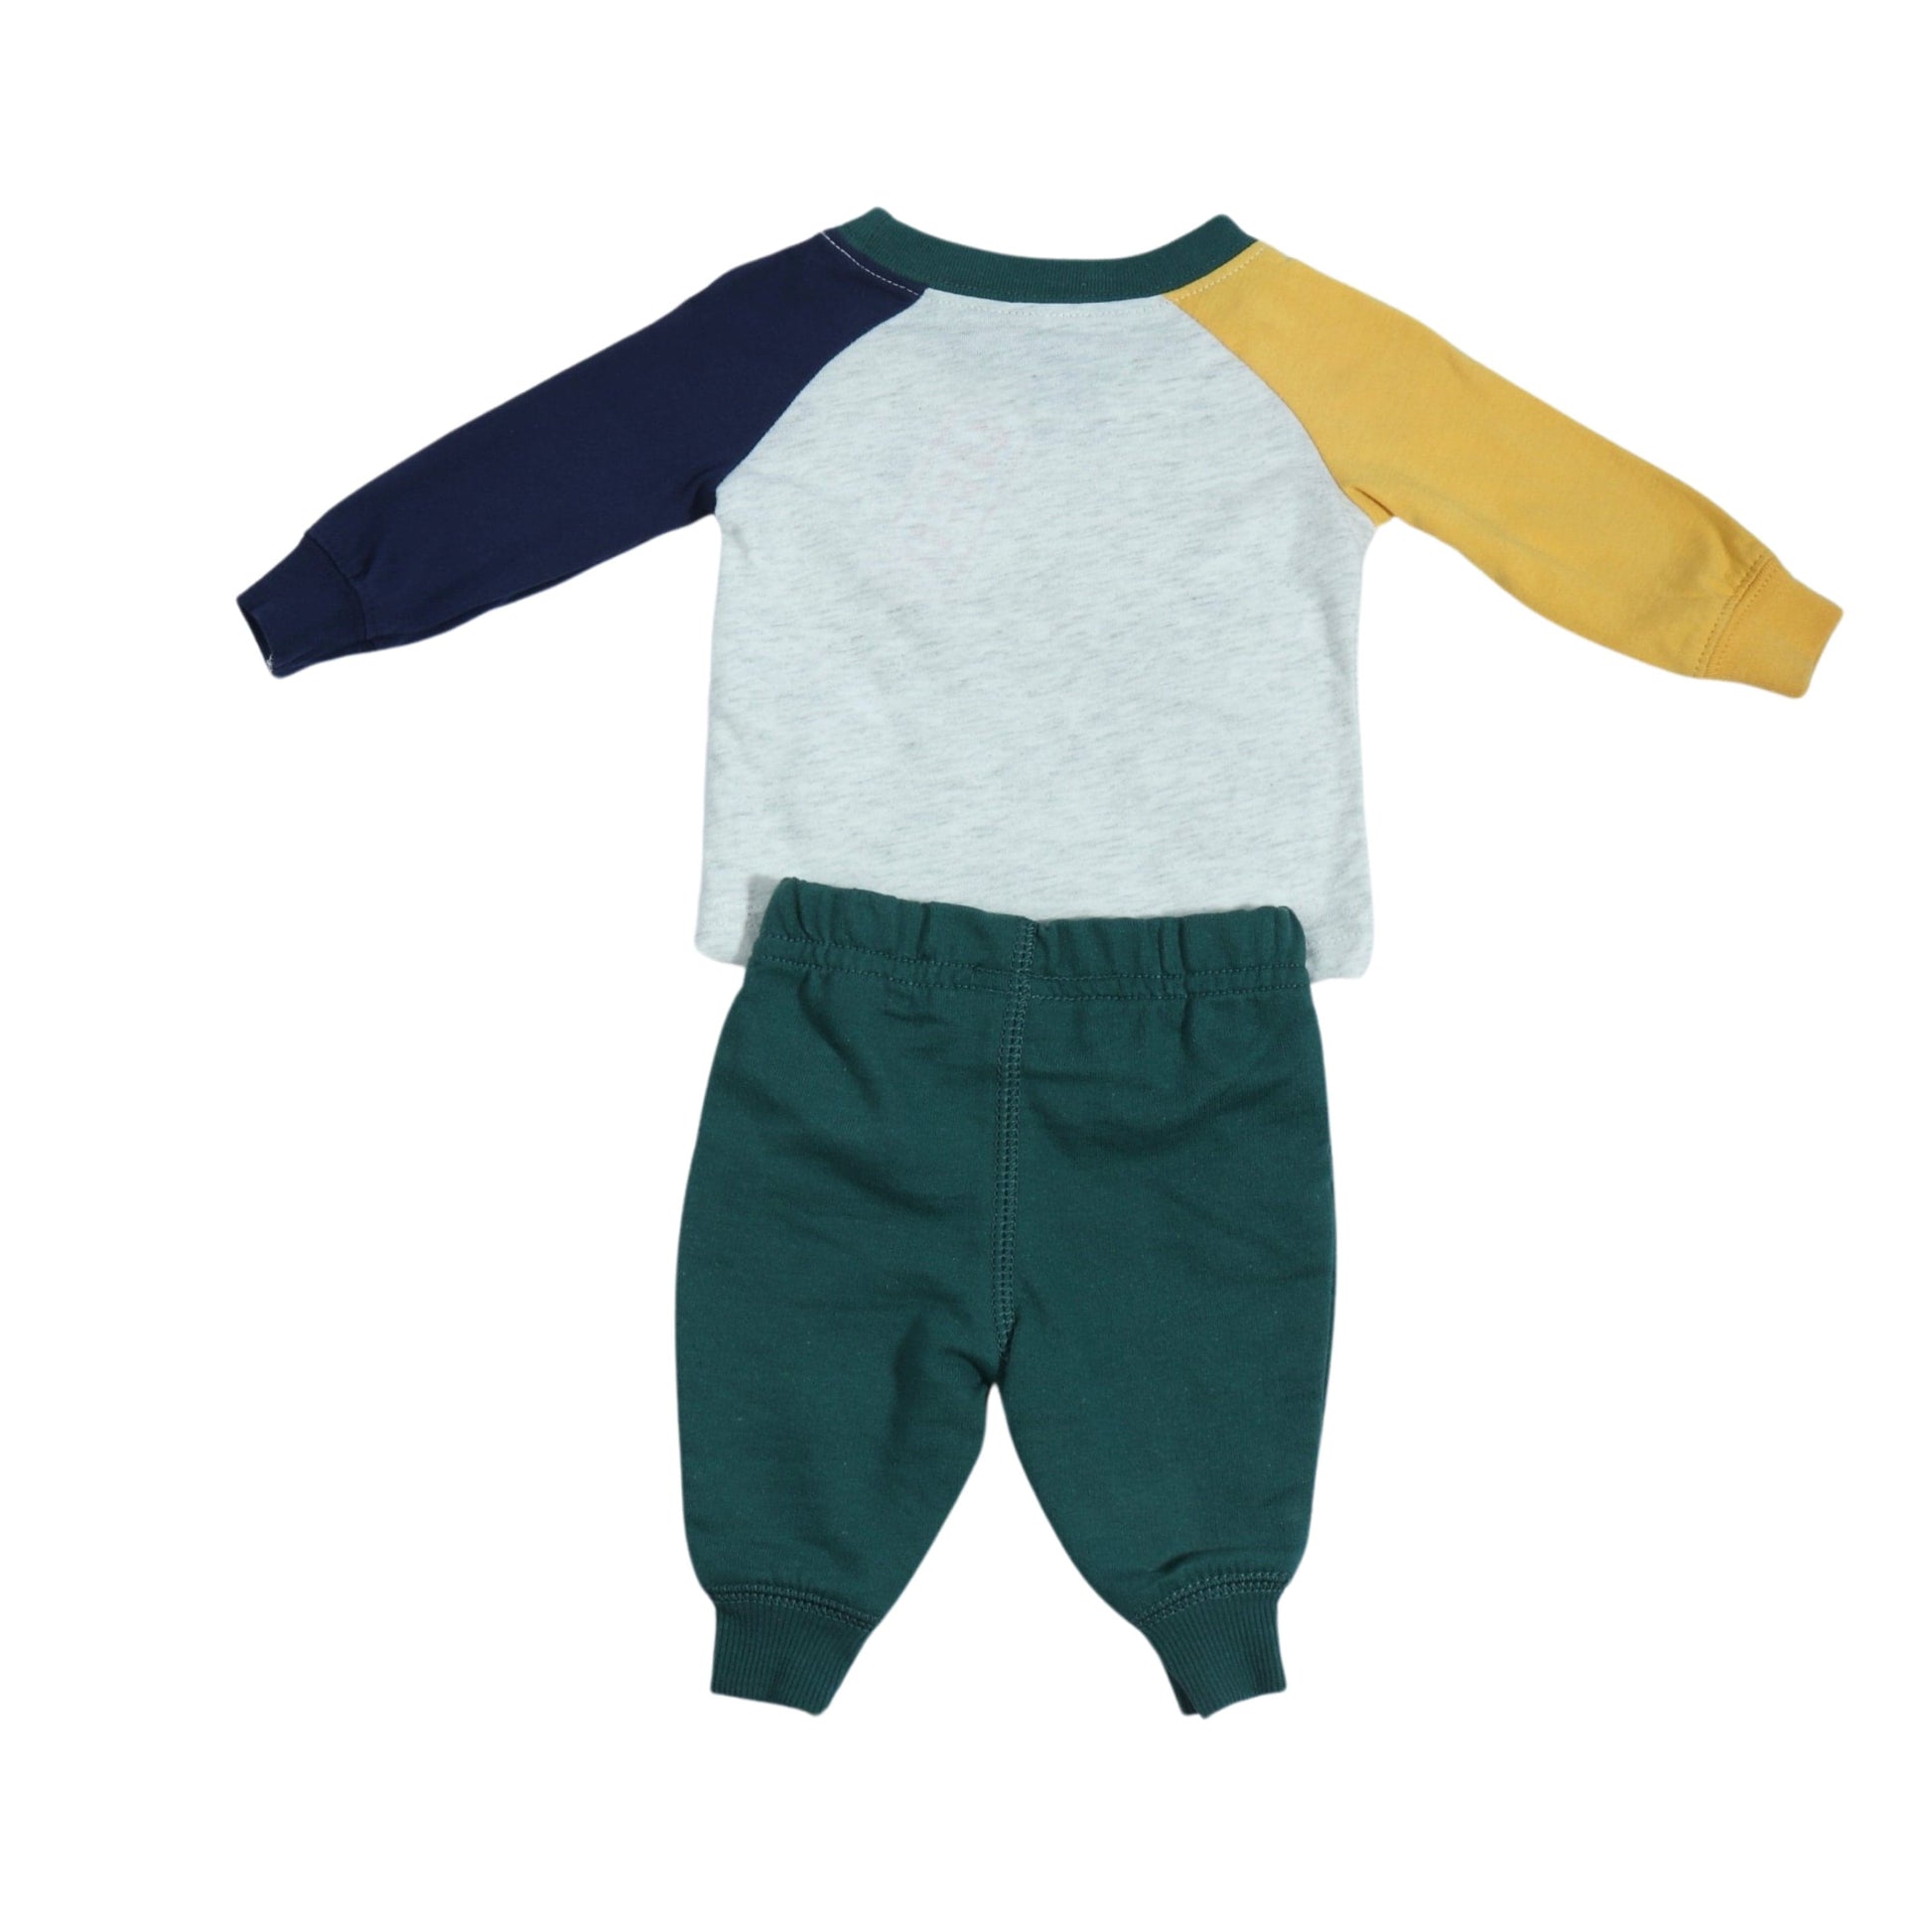 CARTER'S Baby Boy New Born / Multi-Color CARTER'S - Baby - Colorblocked Top With Sweatpants Set